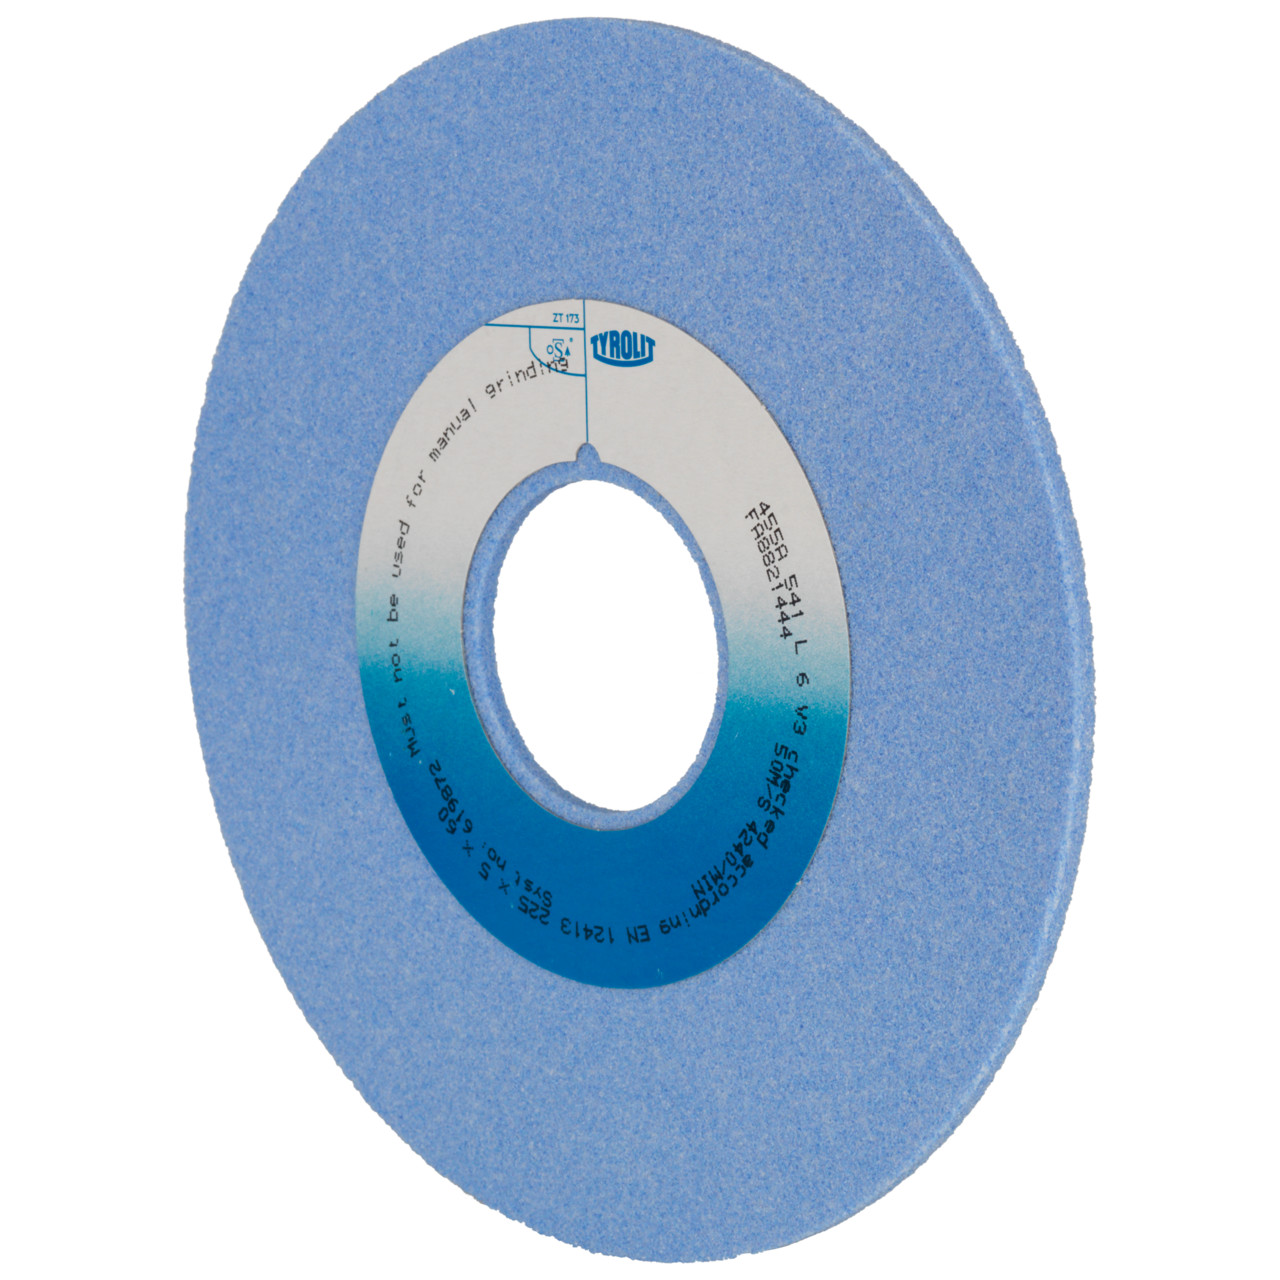 Tyrolit Ceramic conventional and resin-bonded CBN profile grinding wheels DxDxH 225x5x60 For carbide and HSS, shape: 1, Art. 619872